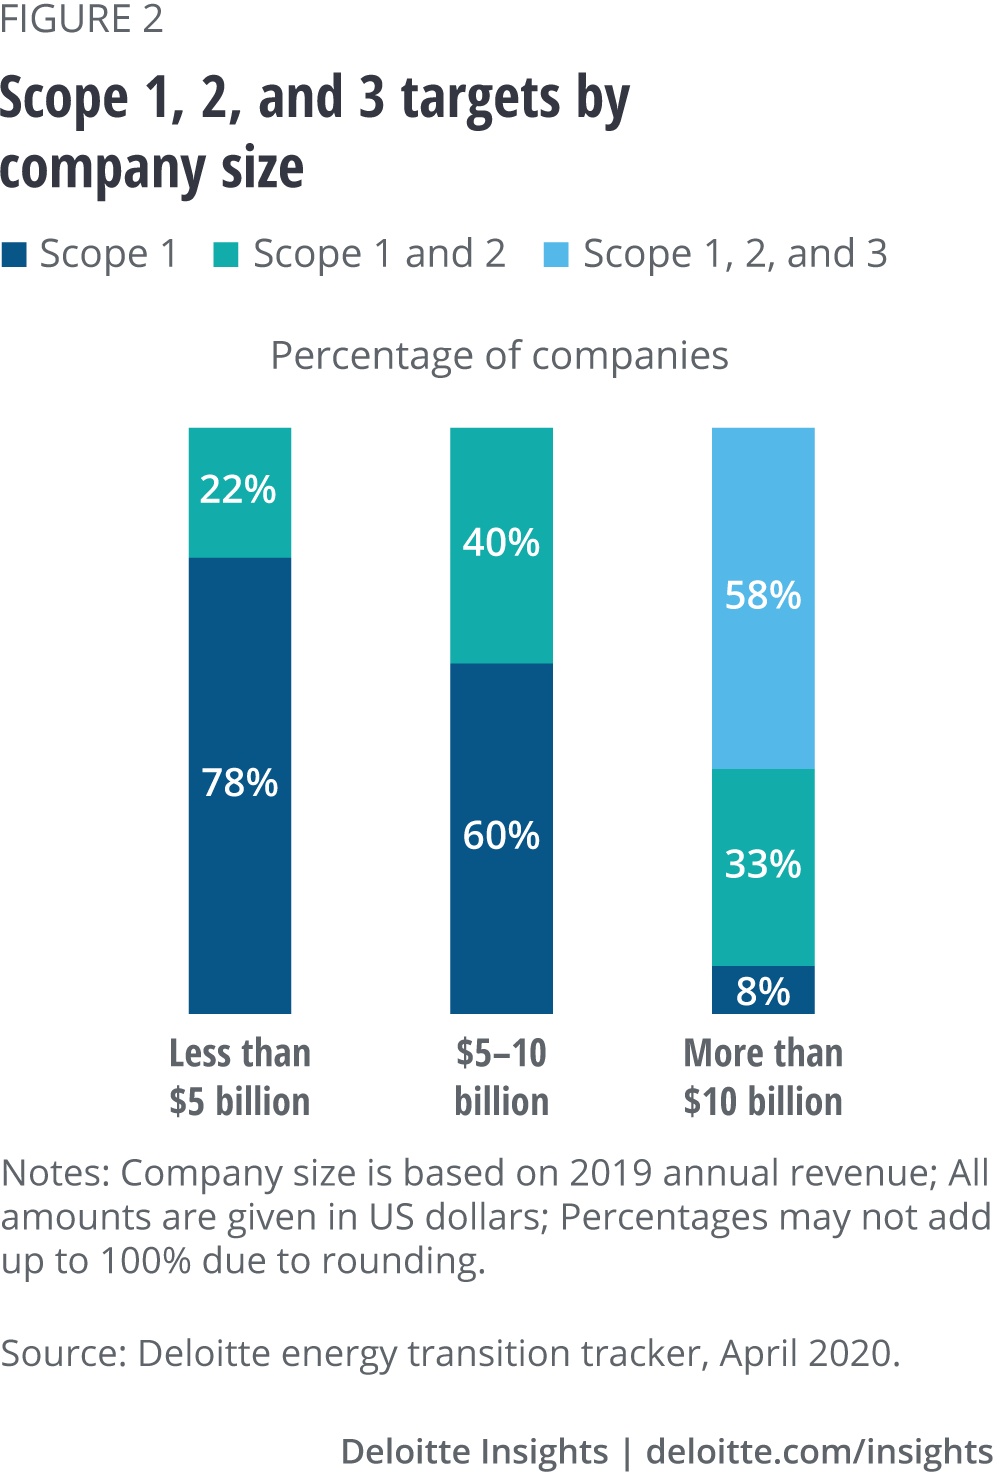 Scope 1, 2, and 3 targets by company size